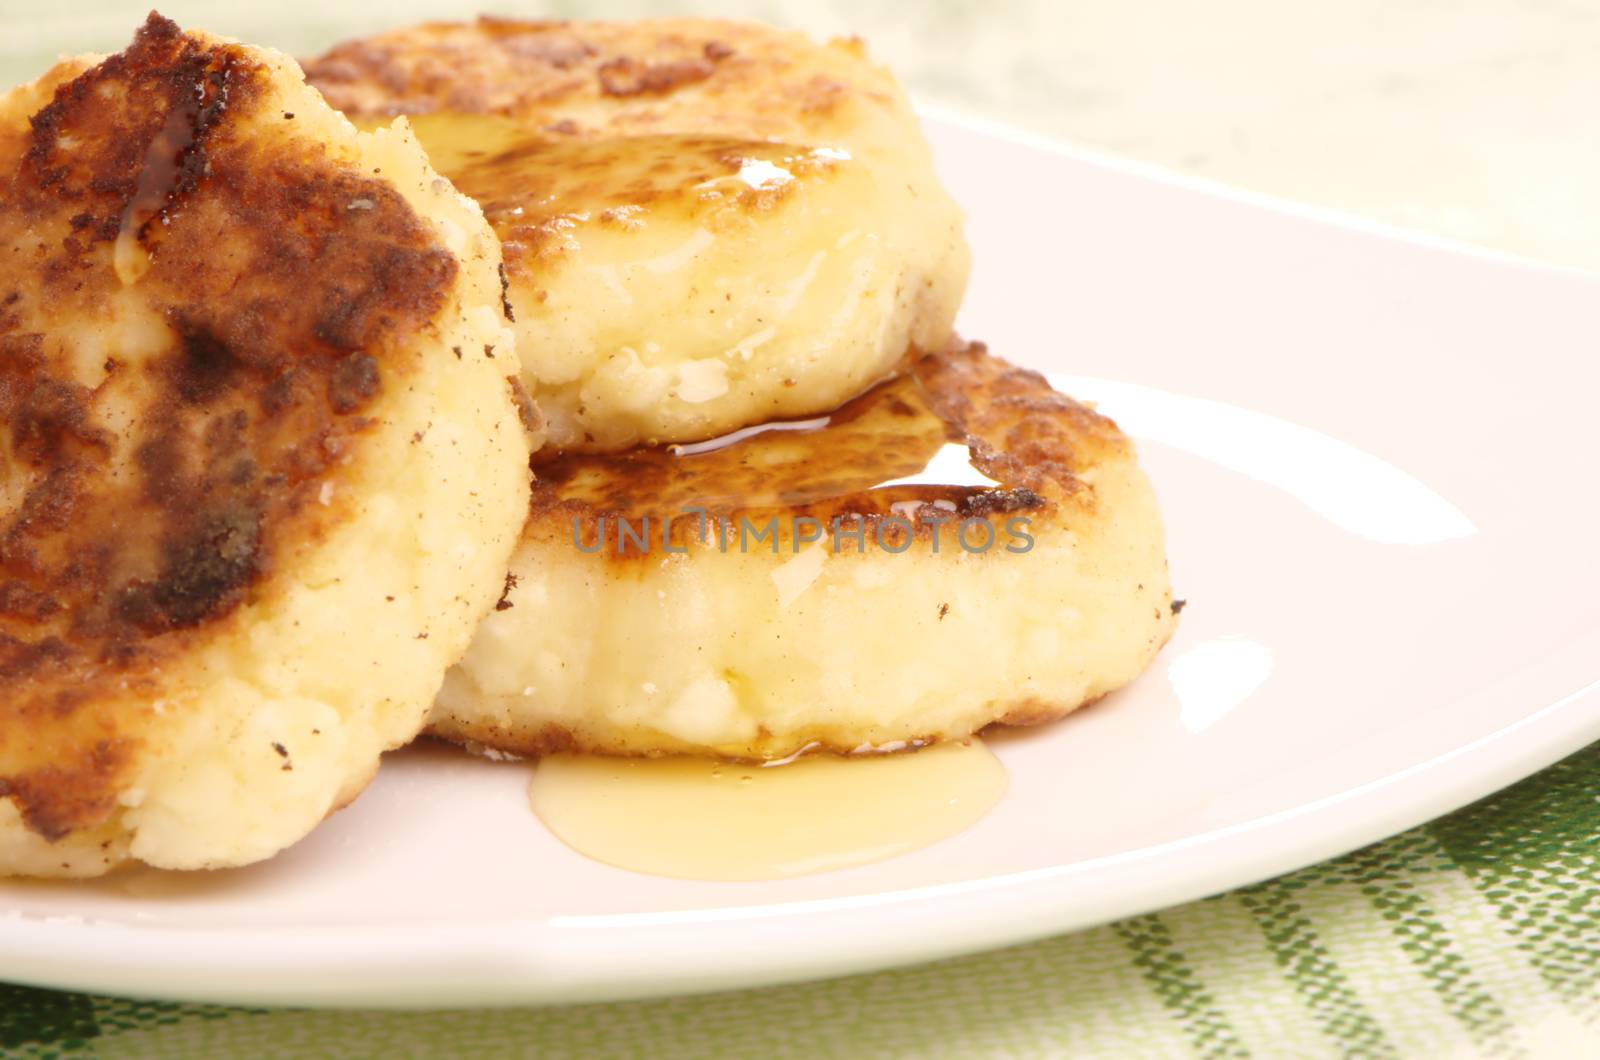 Delicious homemade cheese pancakes with honey by Ravenestling